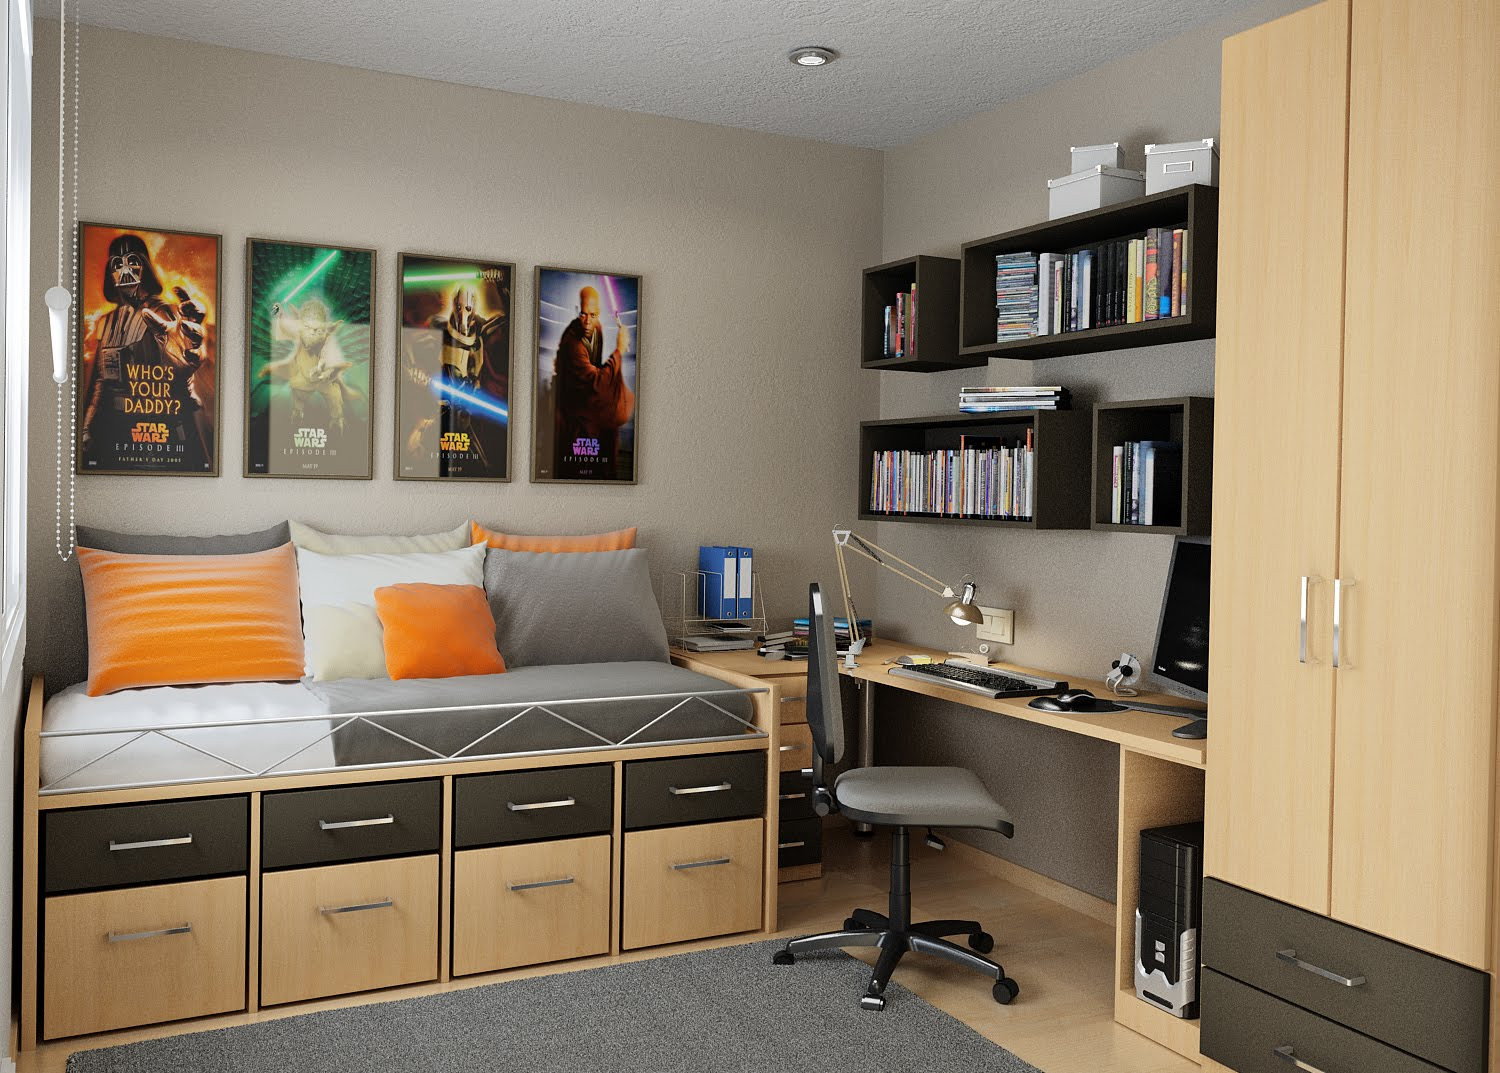 Storage Solutions For Small Bedroom
 Small Bedroom Storage Solutions Designed to Save up Space